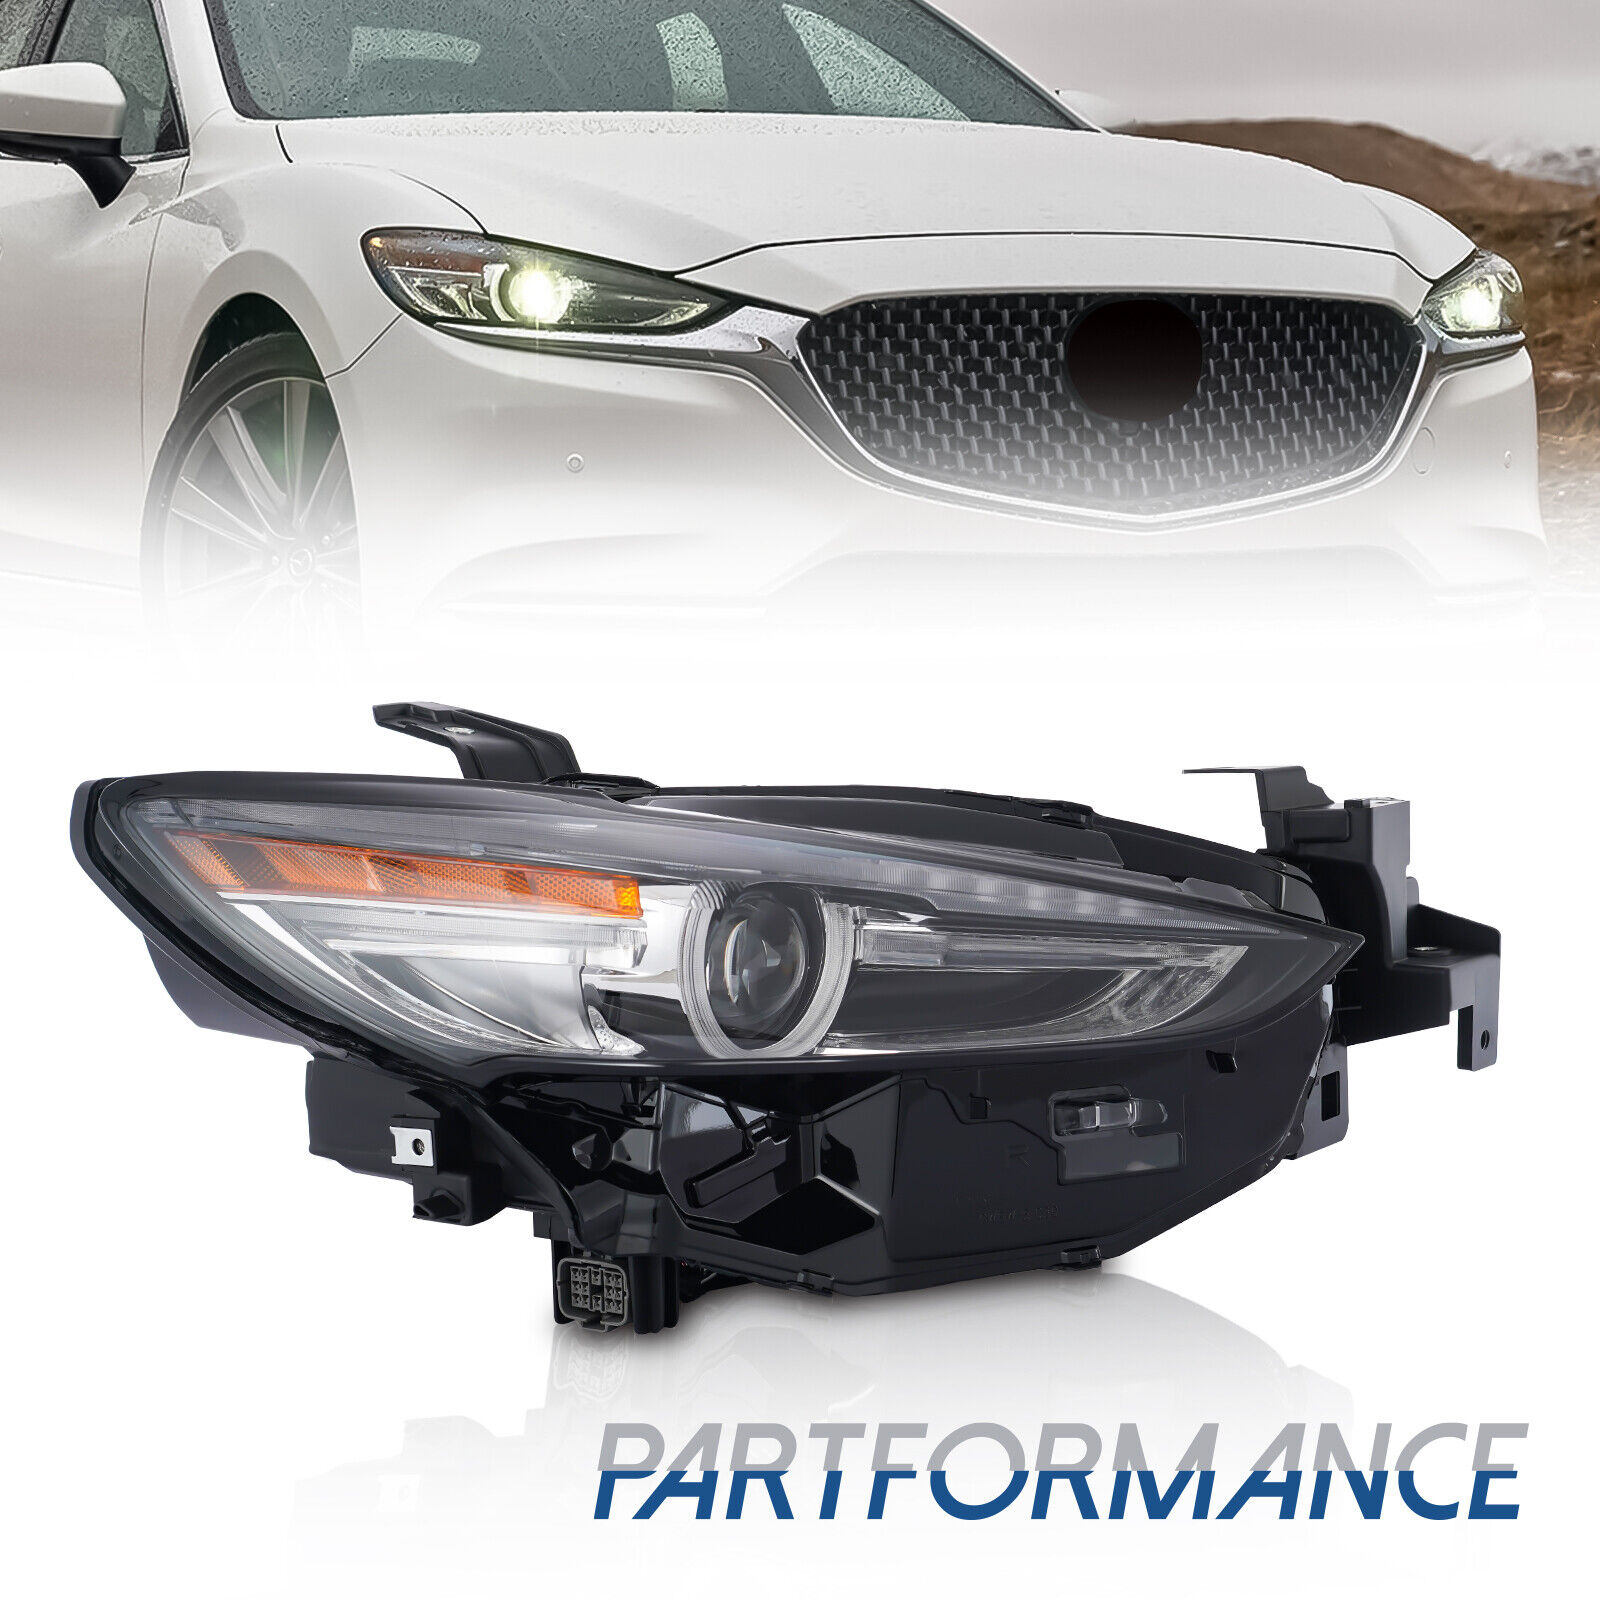 Full LED Headlights For 2019-2021 Mazda 6 Adaptive W/AFS Headlamps Right Side